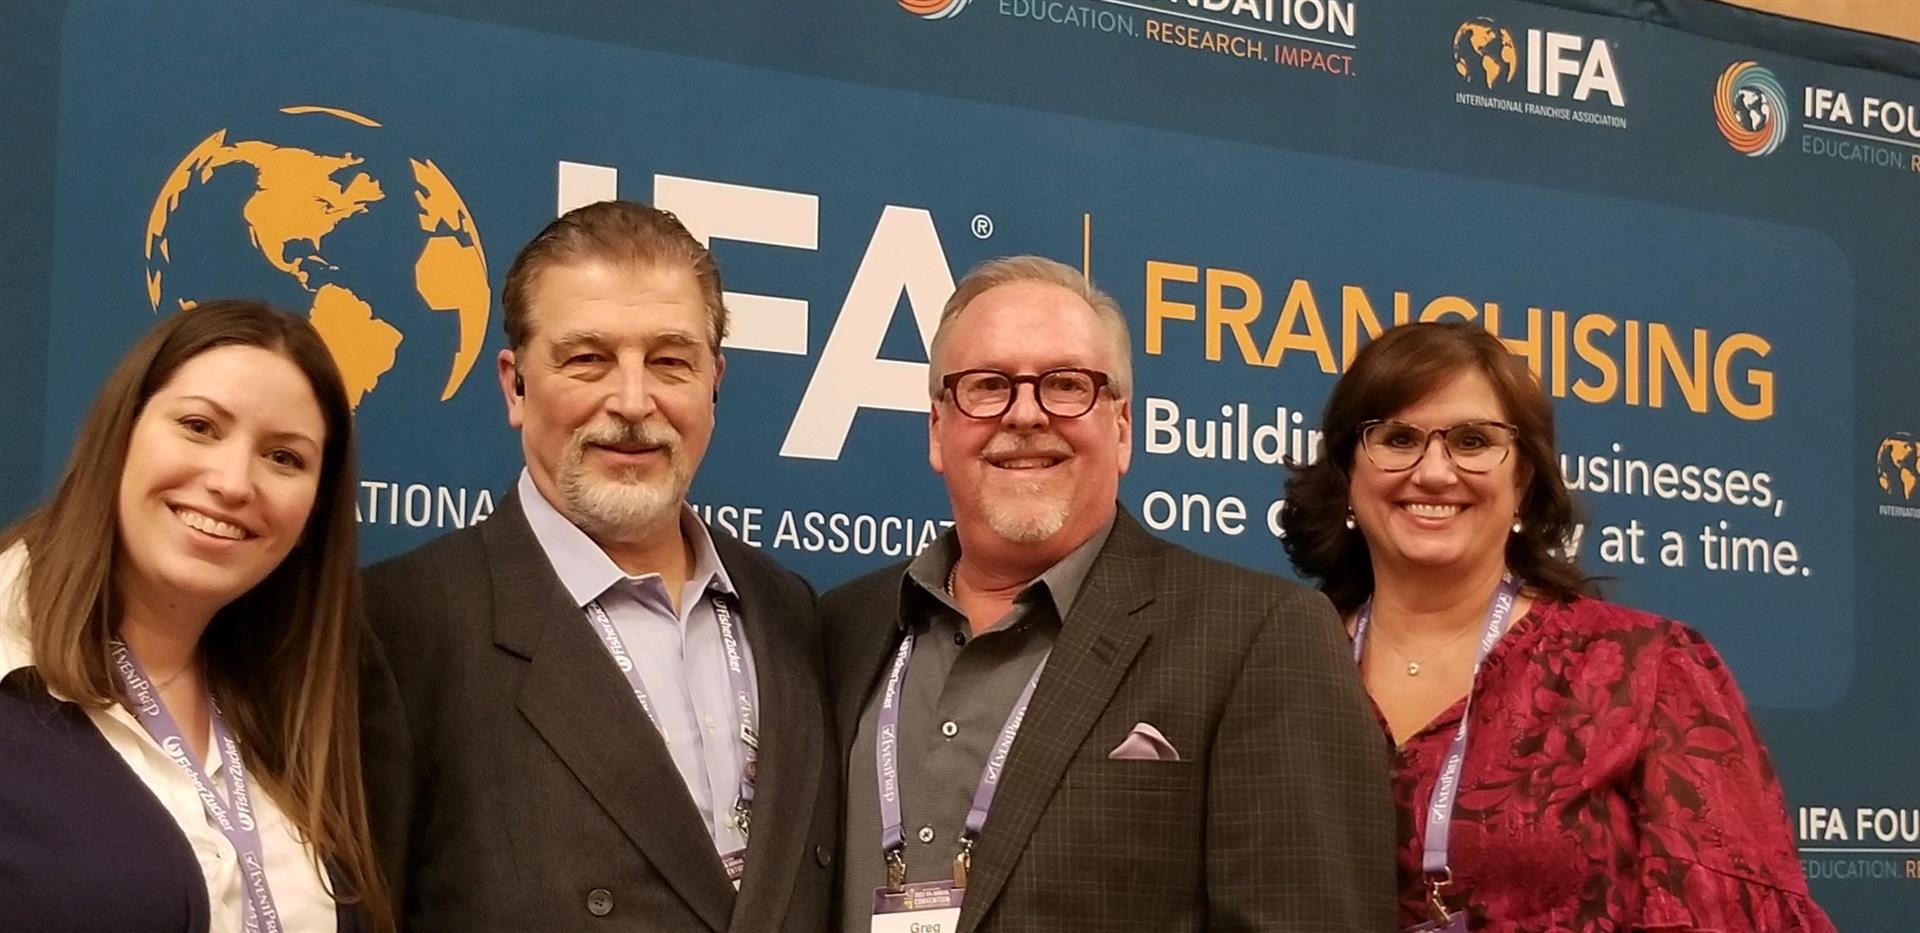 Turbo Tint’s Greg Goodman Named IFA Franchisee of the Year